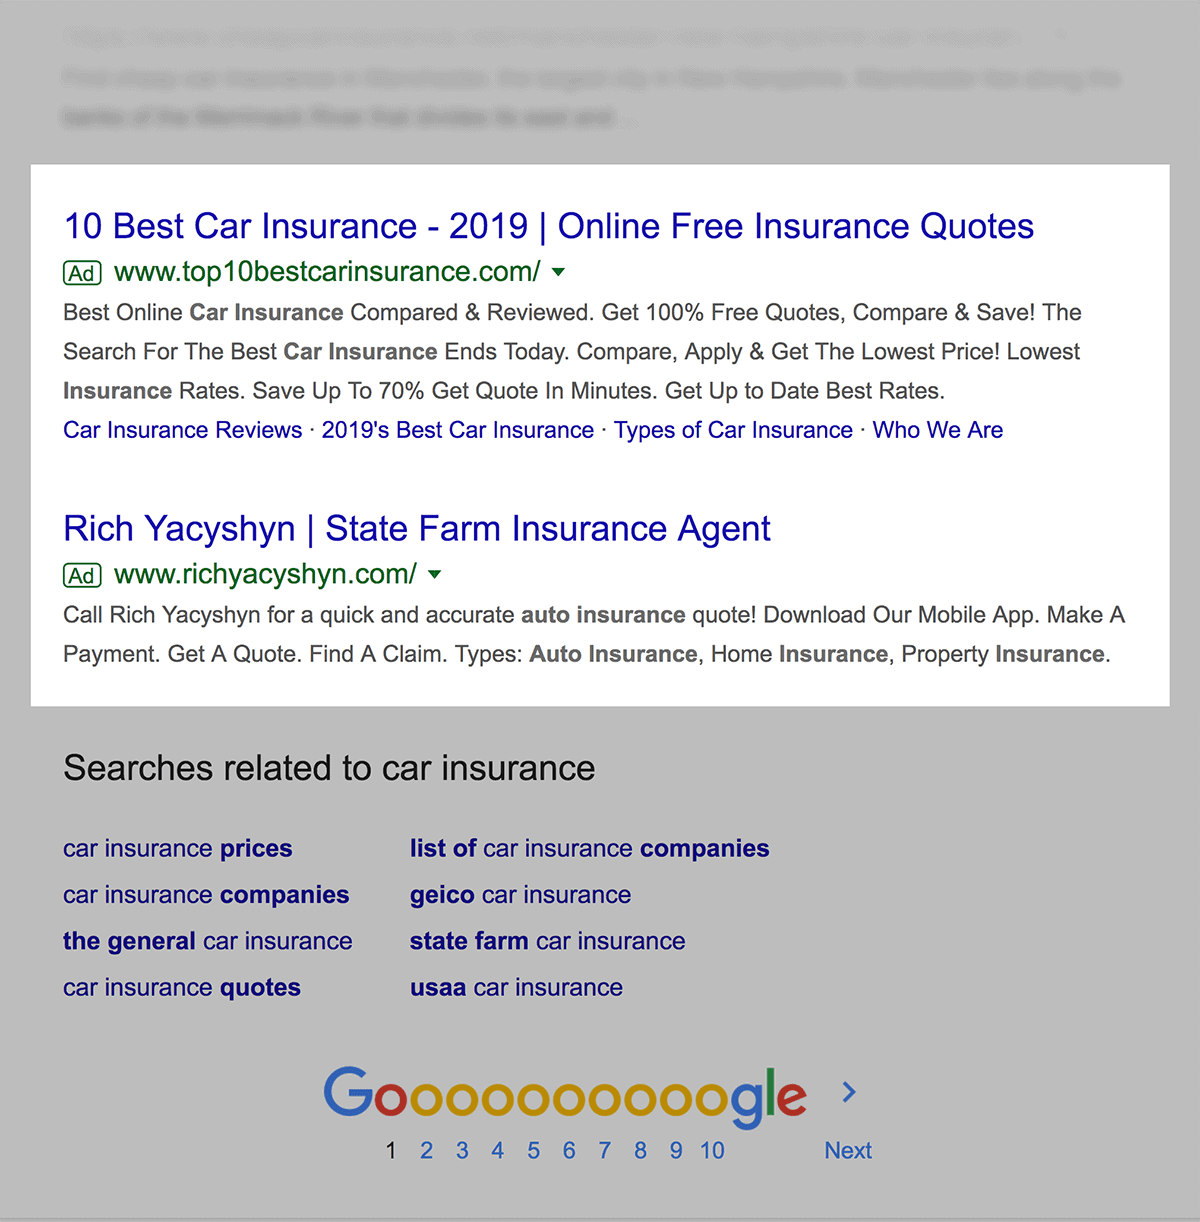 Ads at the bottom of SERPs page